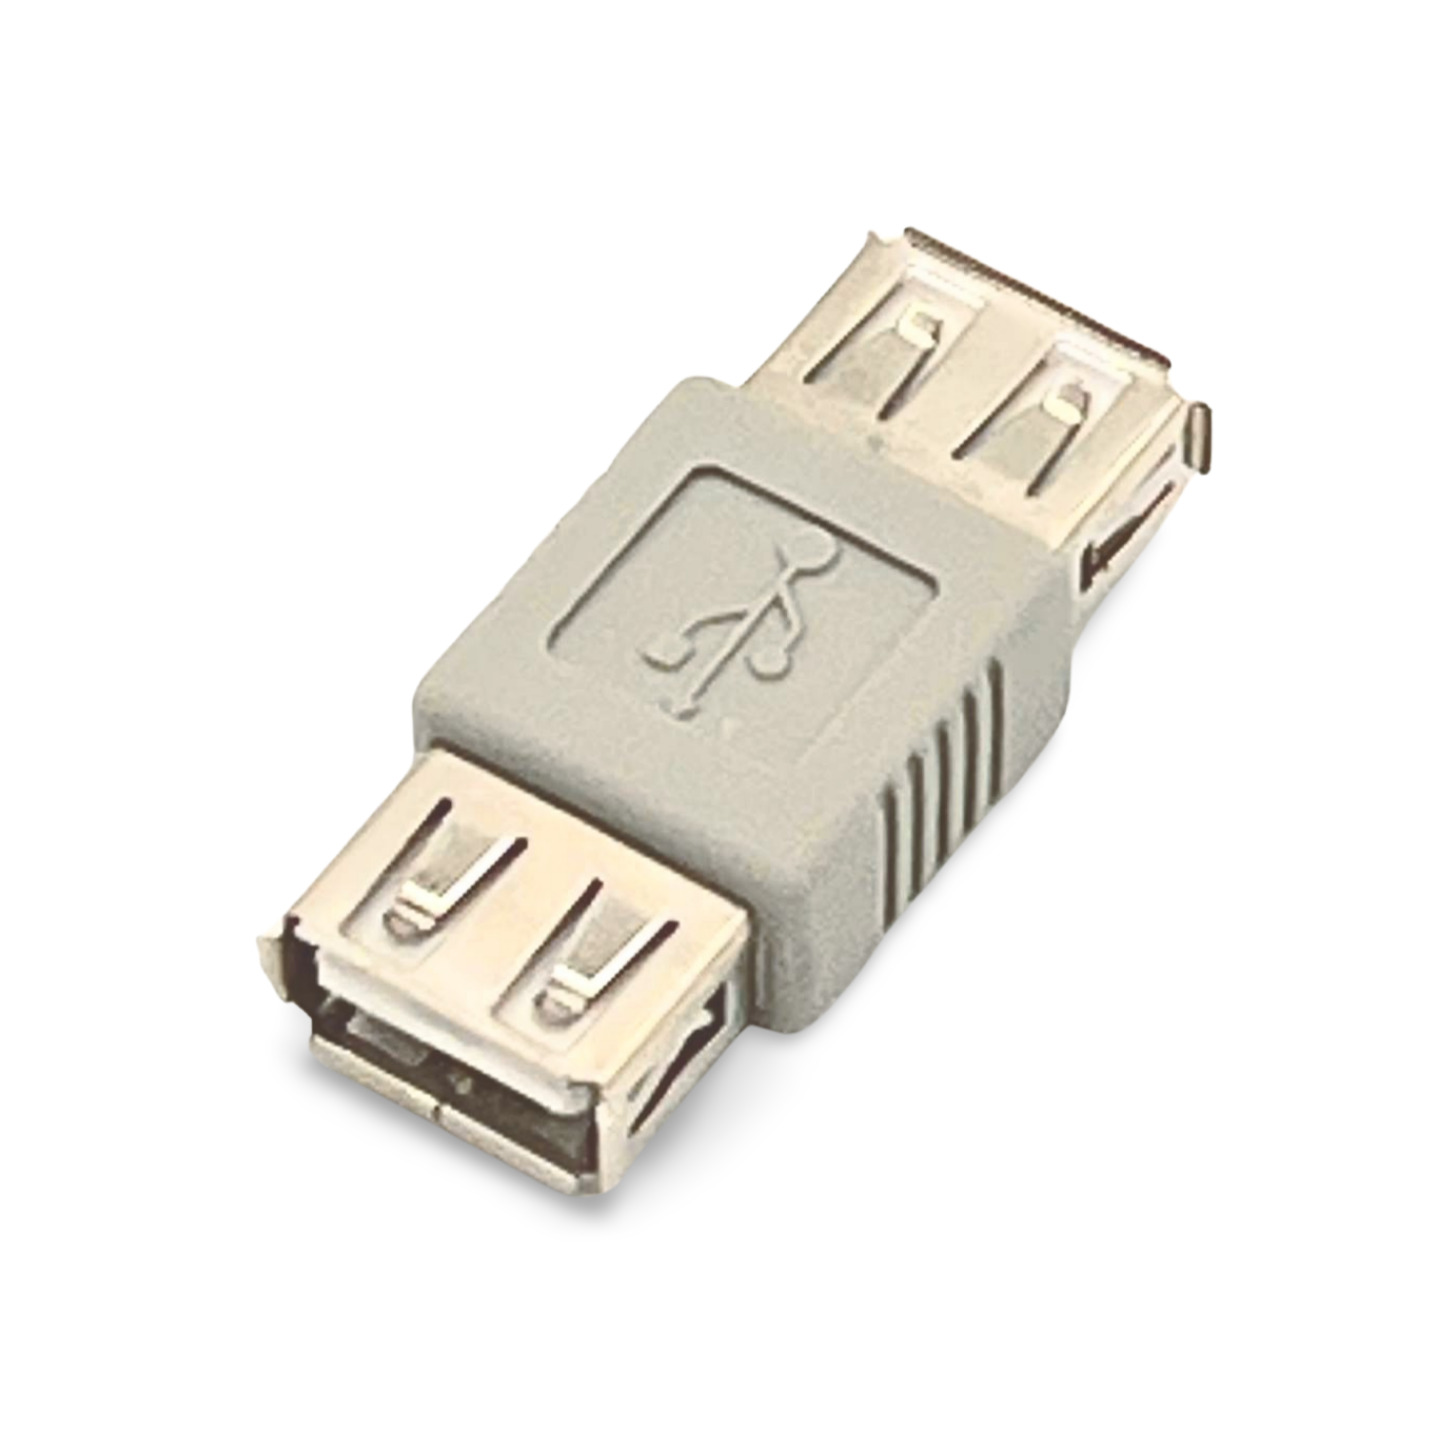 1in USB 2.0 Slim Gender Change Type-A Female to Female Adapter Coupler - Beige